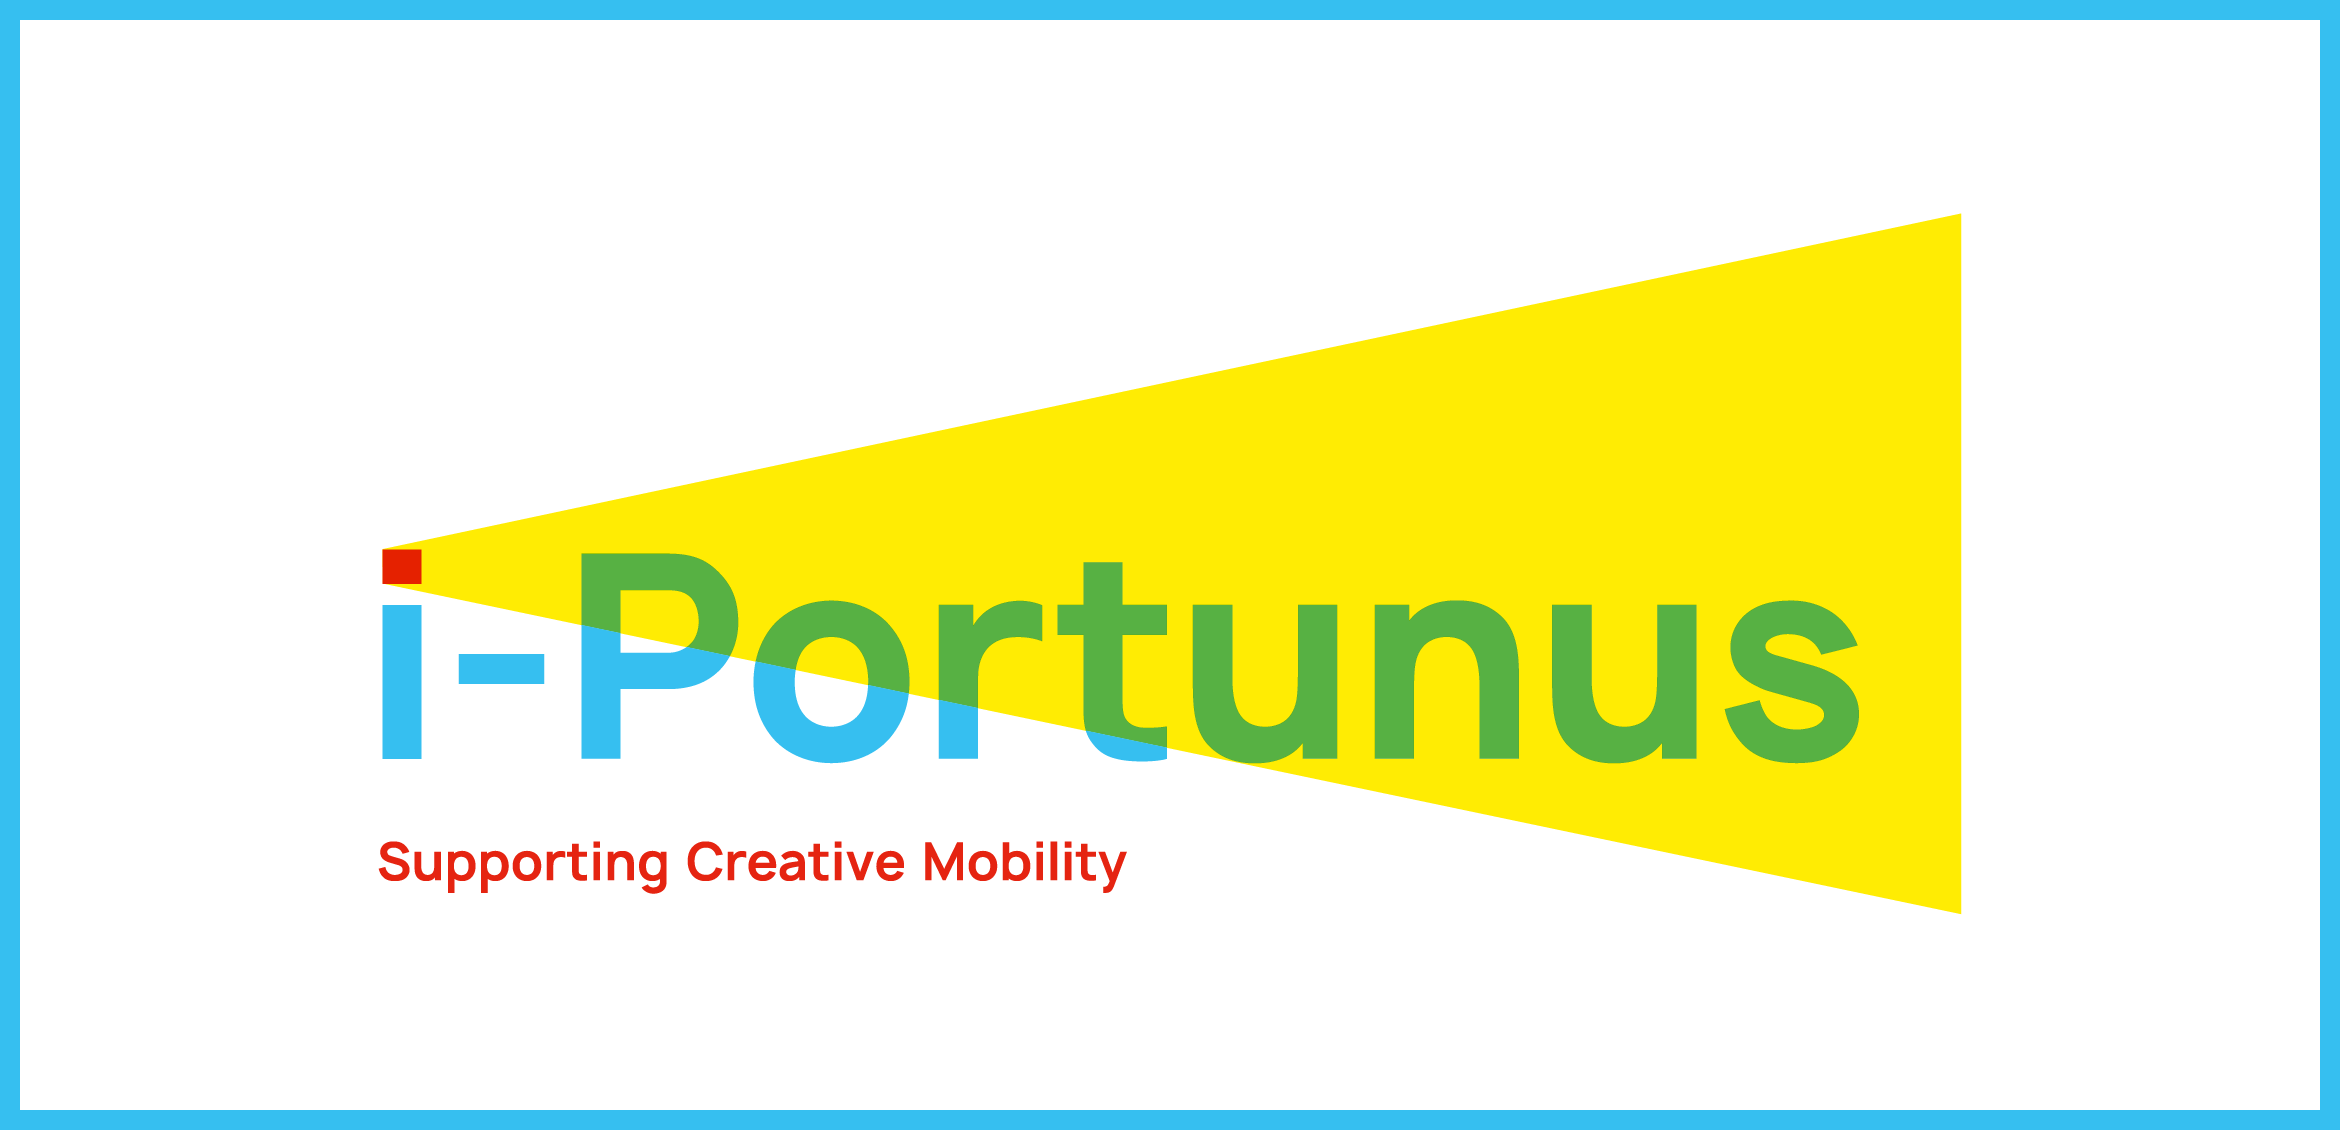 Results of the Second Open Call i-Portunus